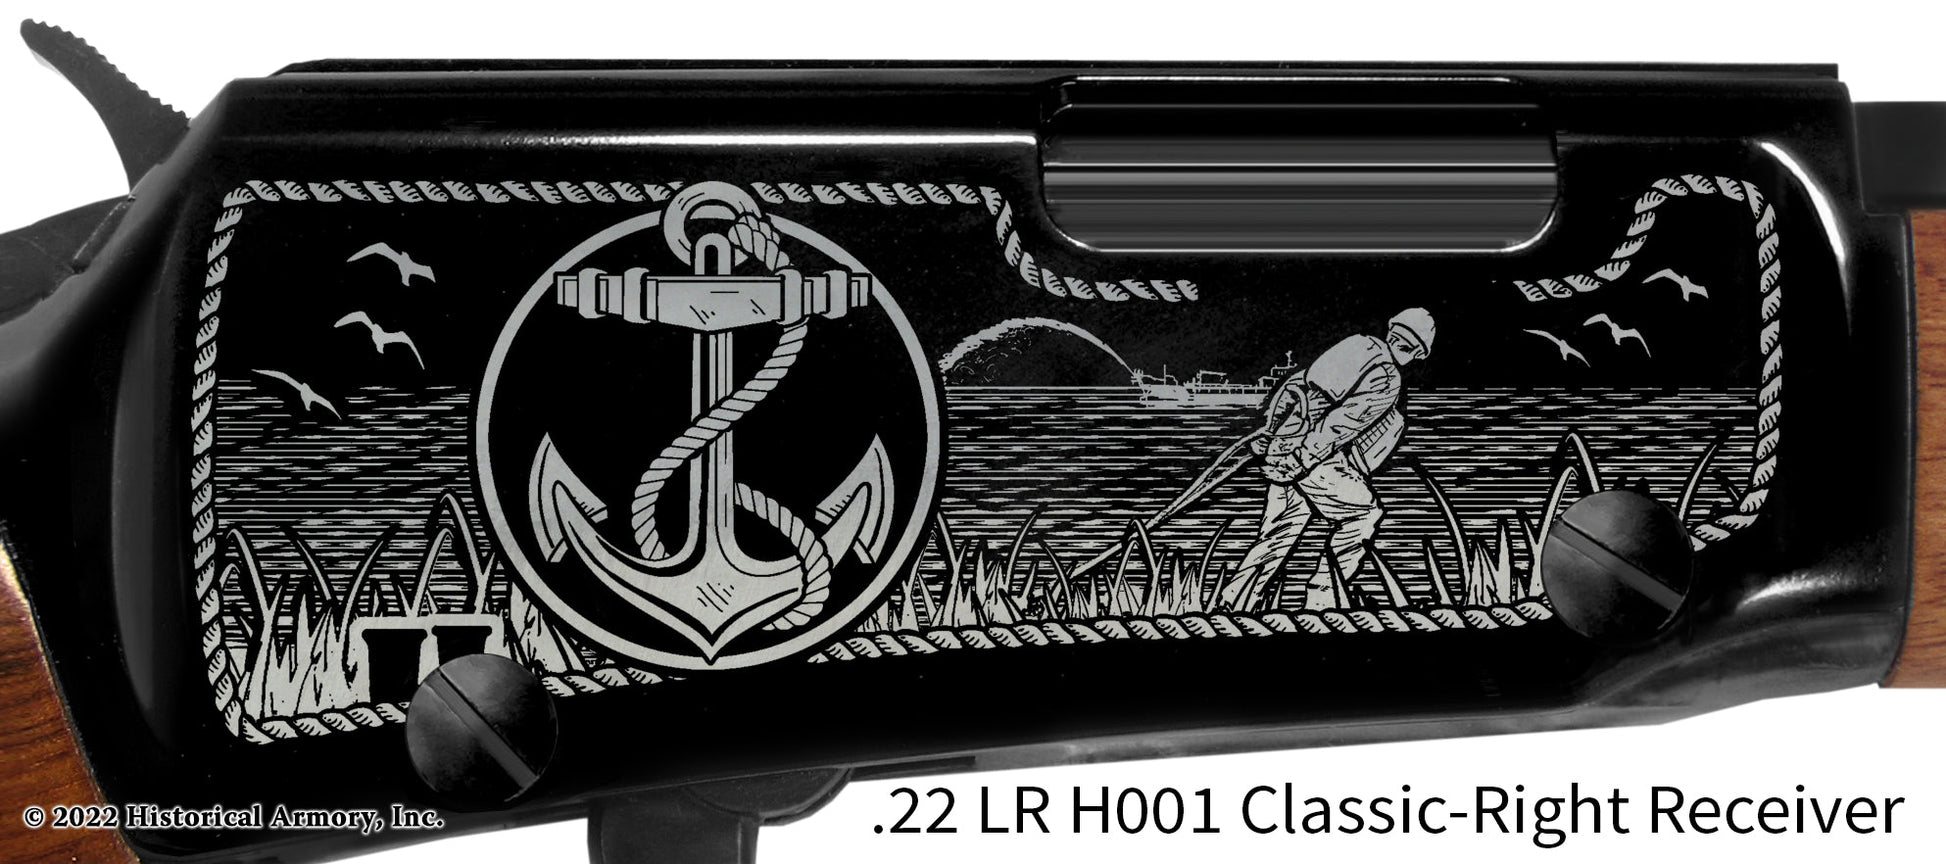 American Towboaters Limited Edition Engraved Henry .22 LR H001 Rifle